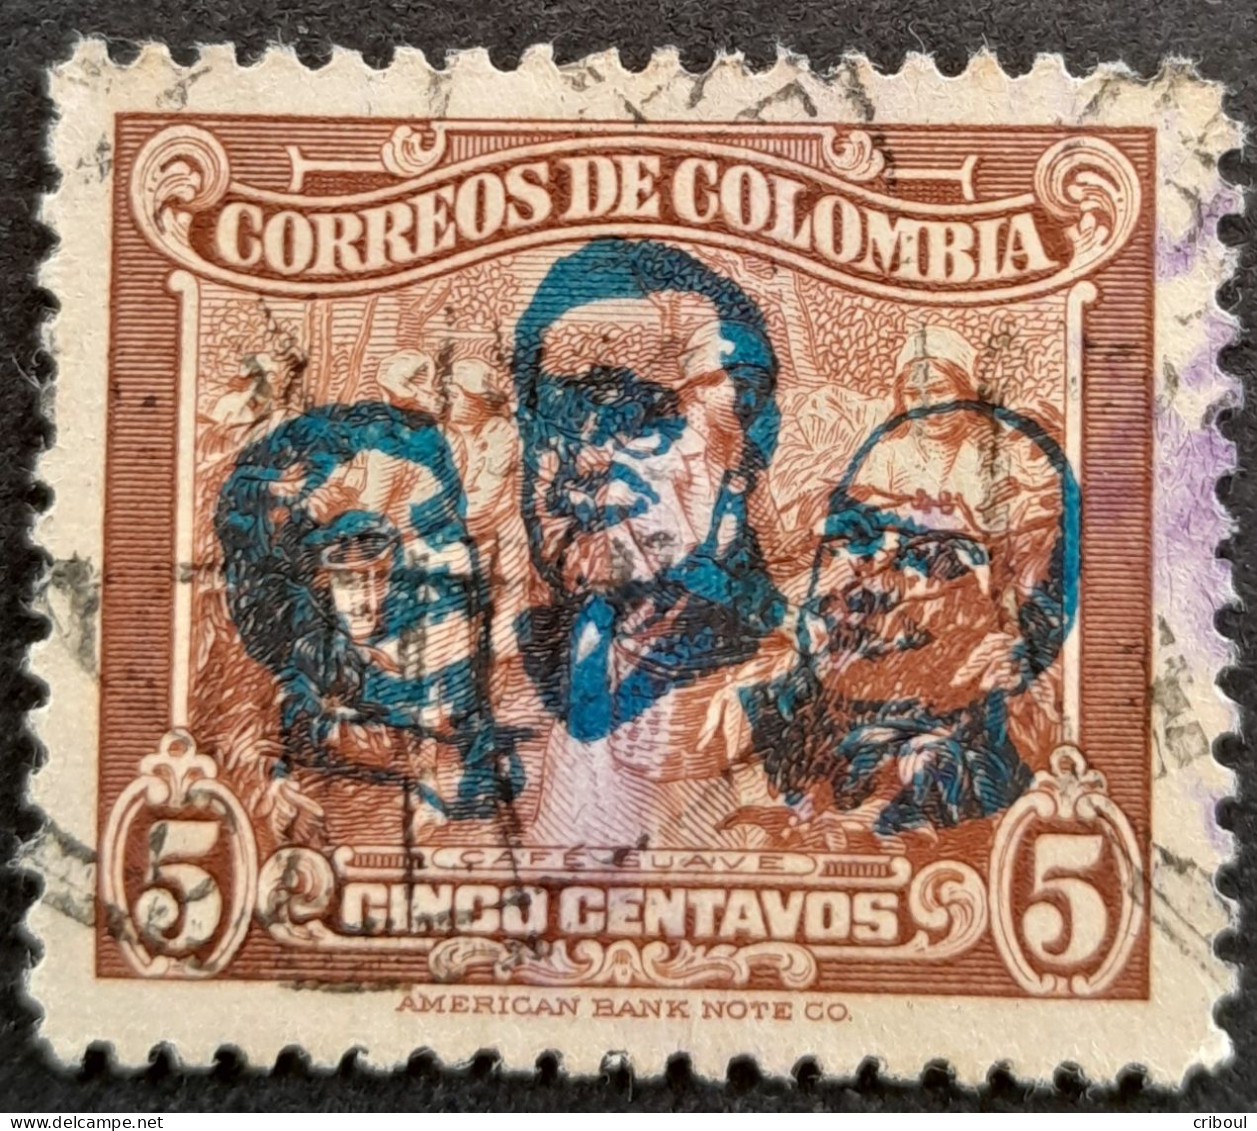 Colombie Colombia 1943 Agriculture Café Surcharge Bleue Blue Overprint Staline Roosevelt Churchill Yvert 359 O Used - Sir Winston Churchill